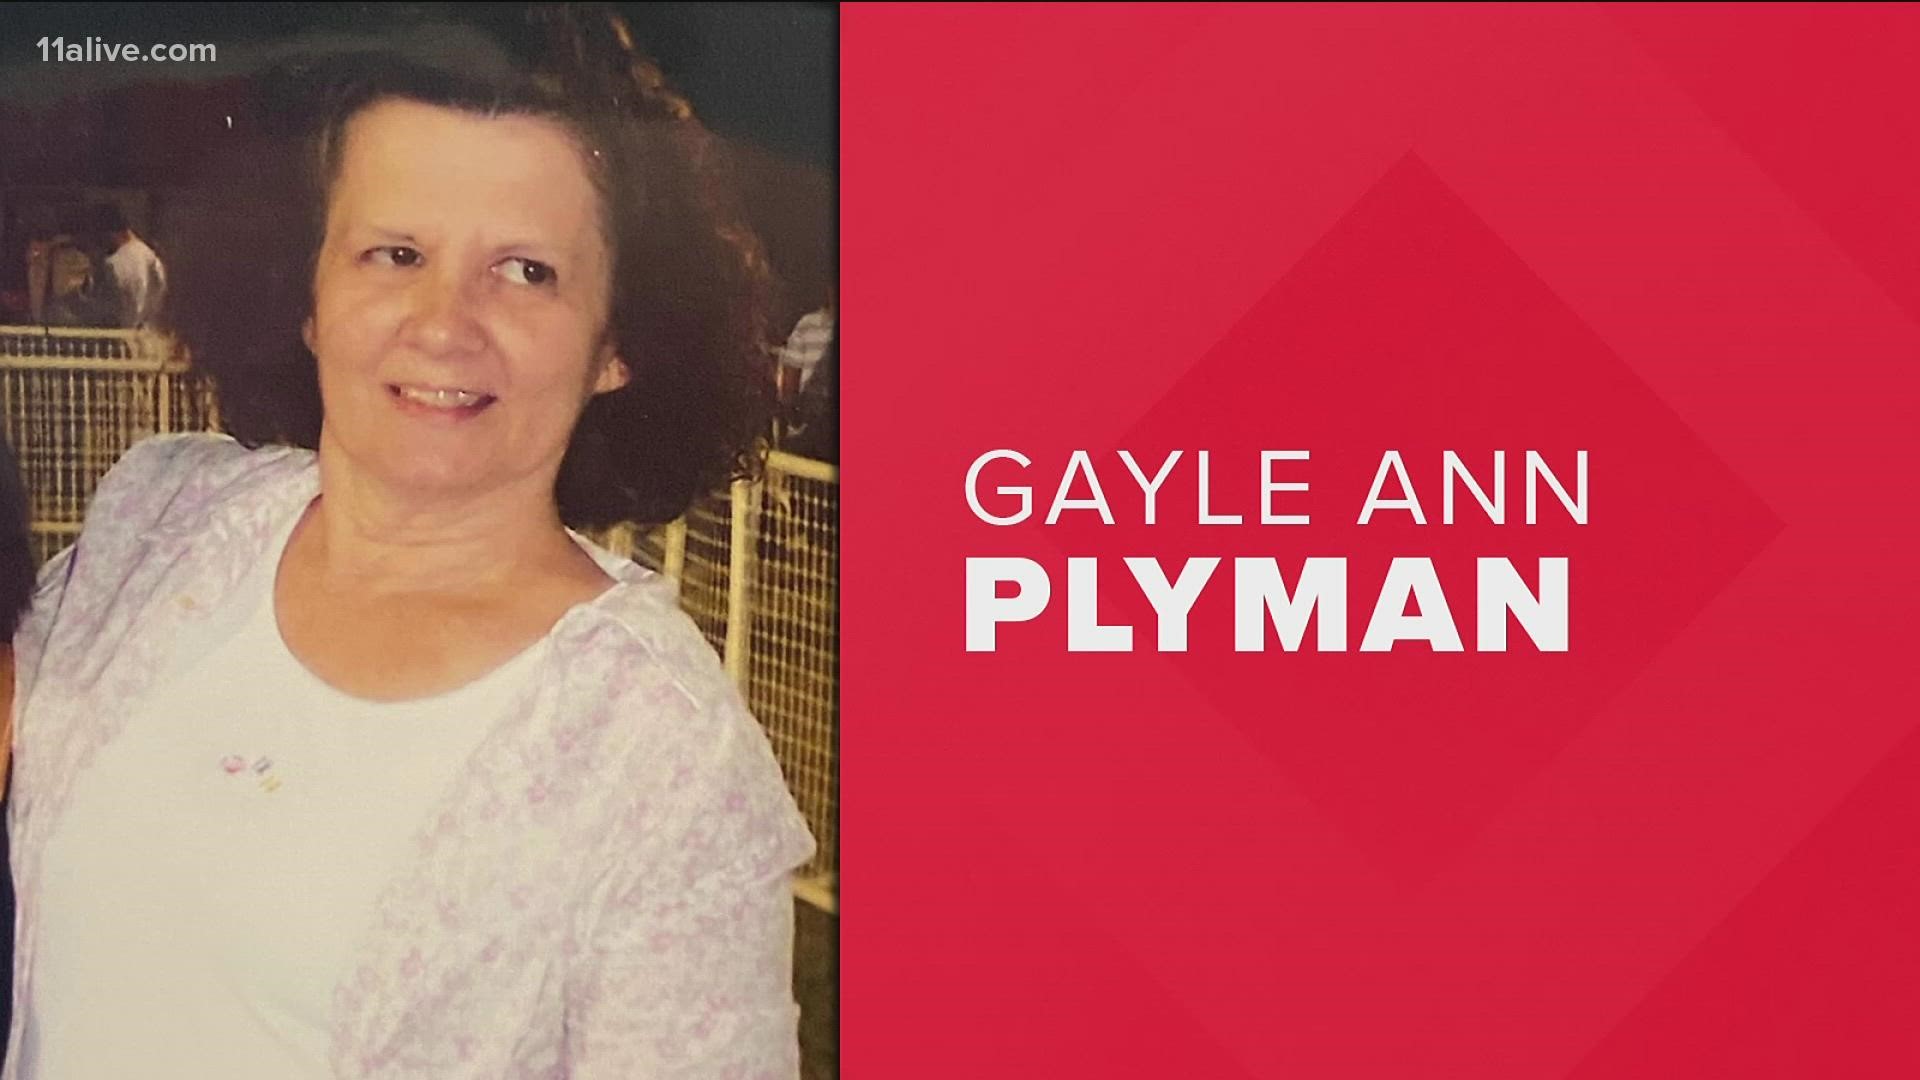 Anyone with information on her whereabouts is being asked to call Glynn County police at 912-554-3645 or to call 911.